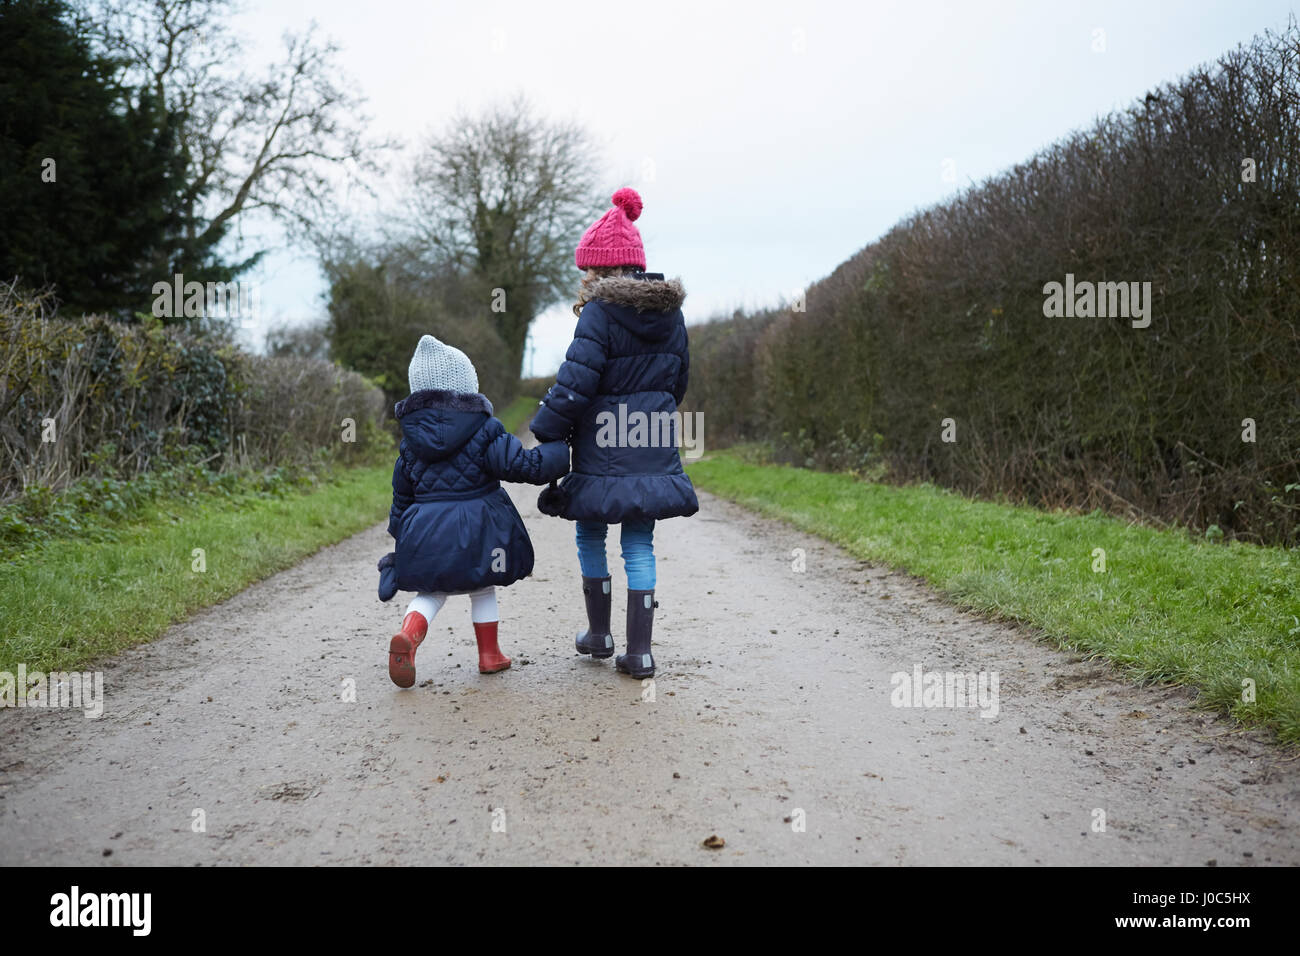 Rear view of girl and female toddler in knit hats walking along rural road Stock Photo